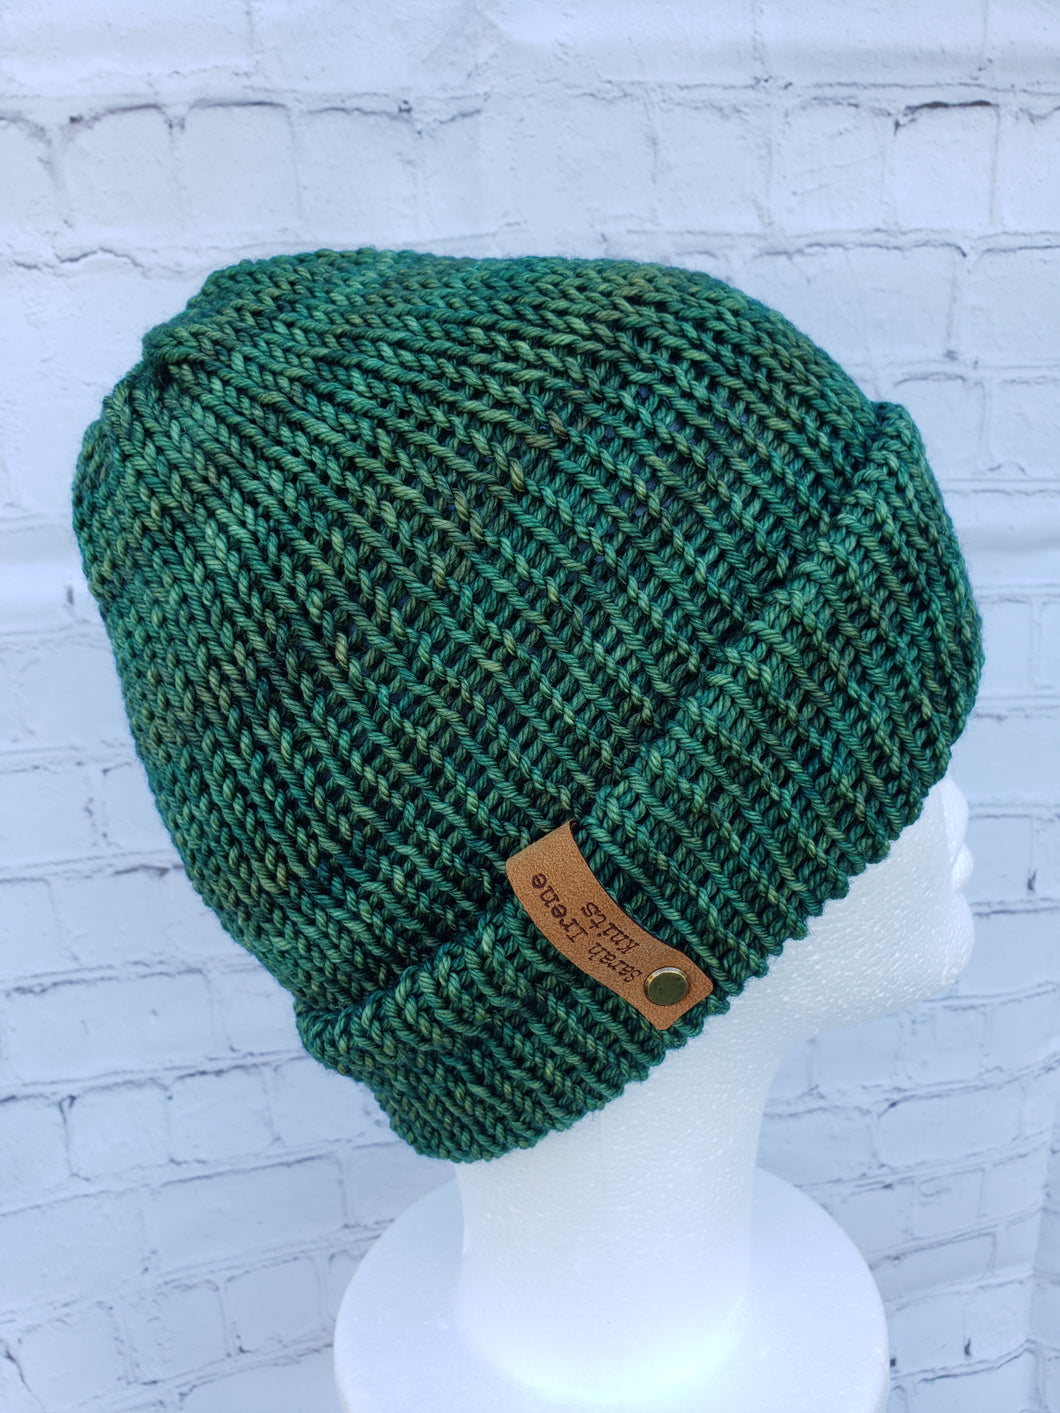 Double brim beanie in multiple shades of green. No pom.